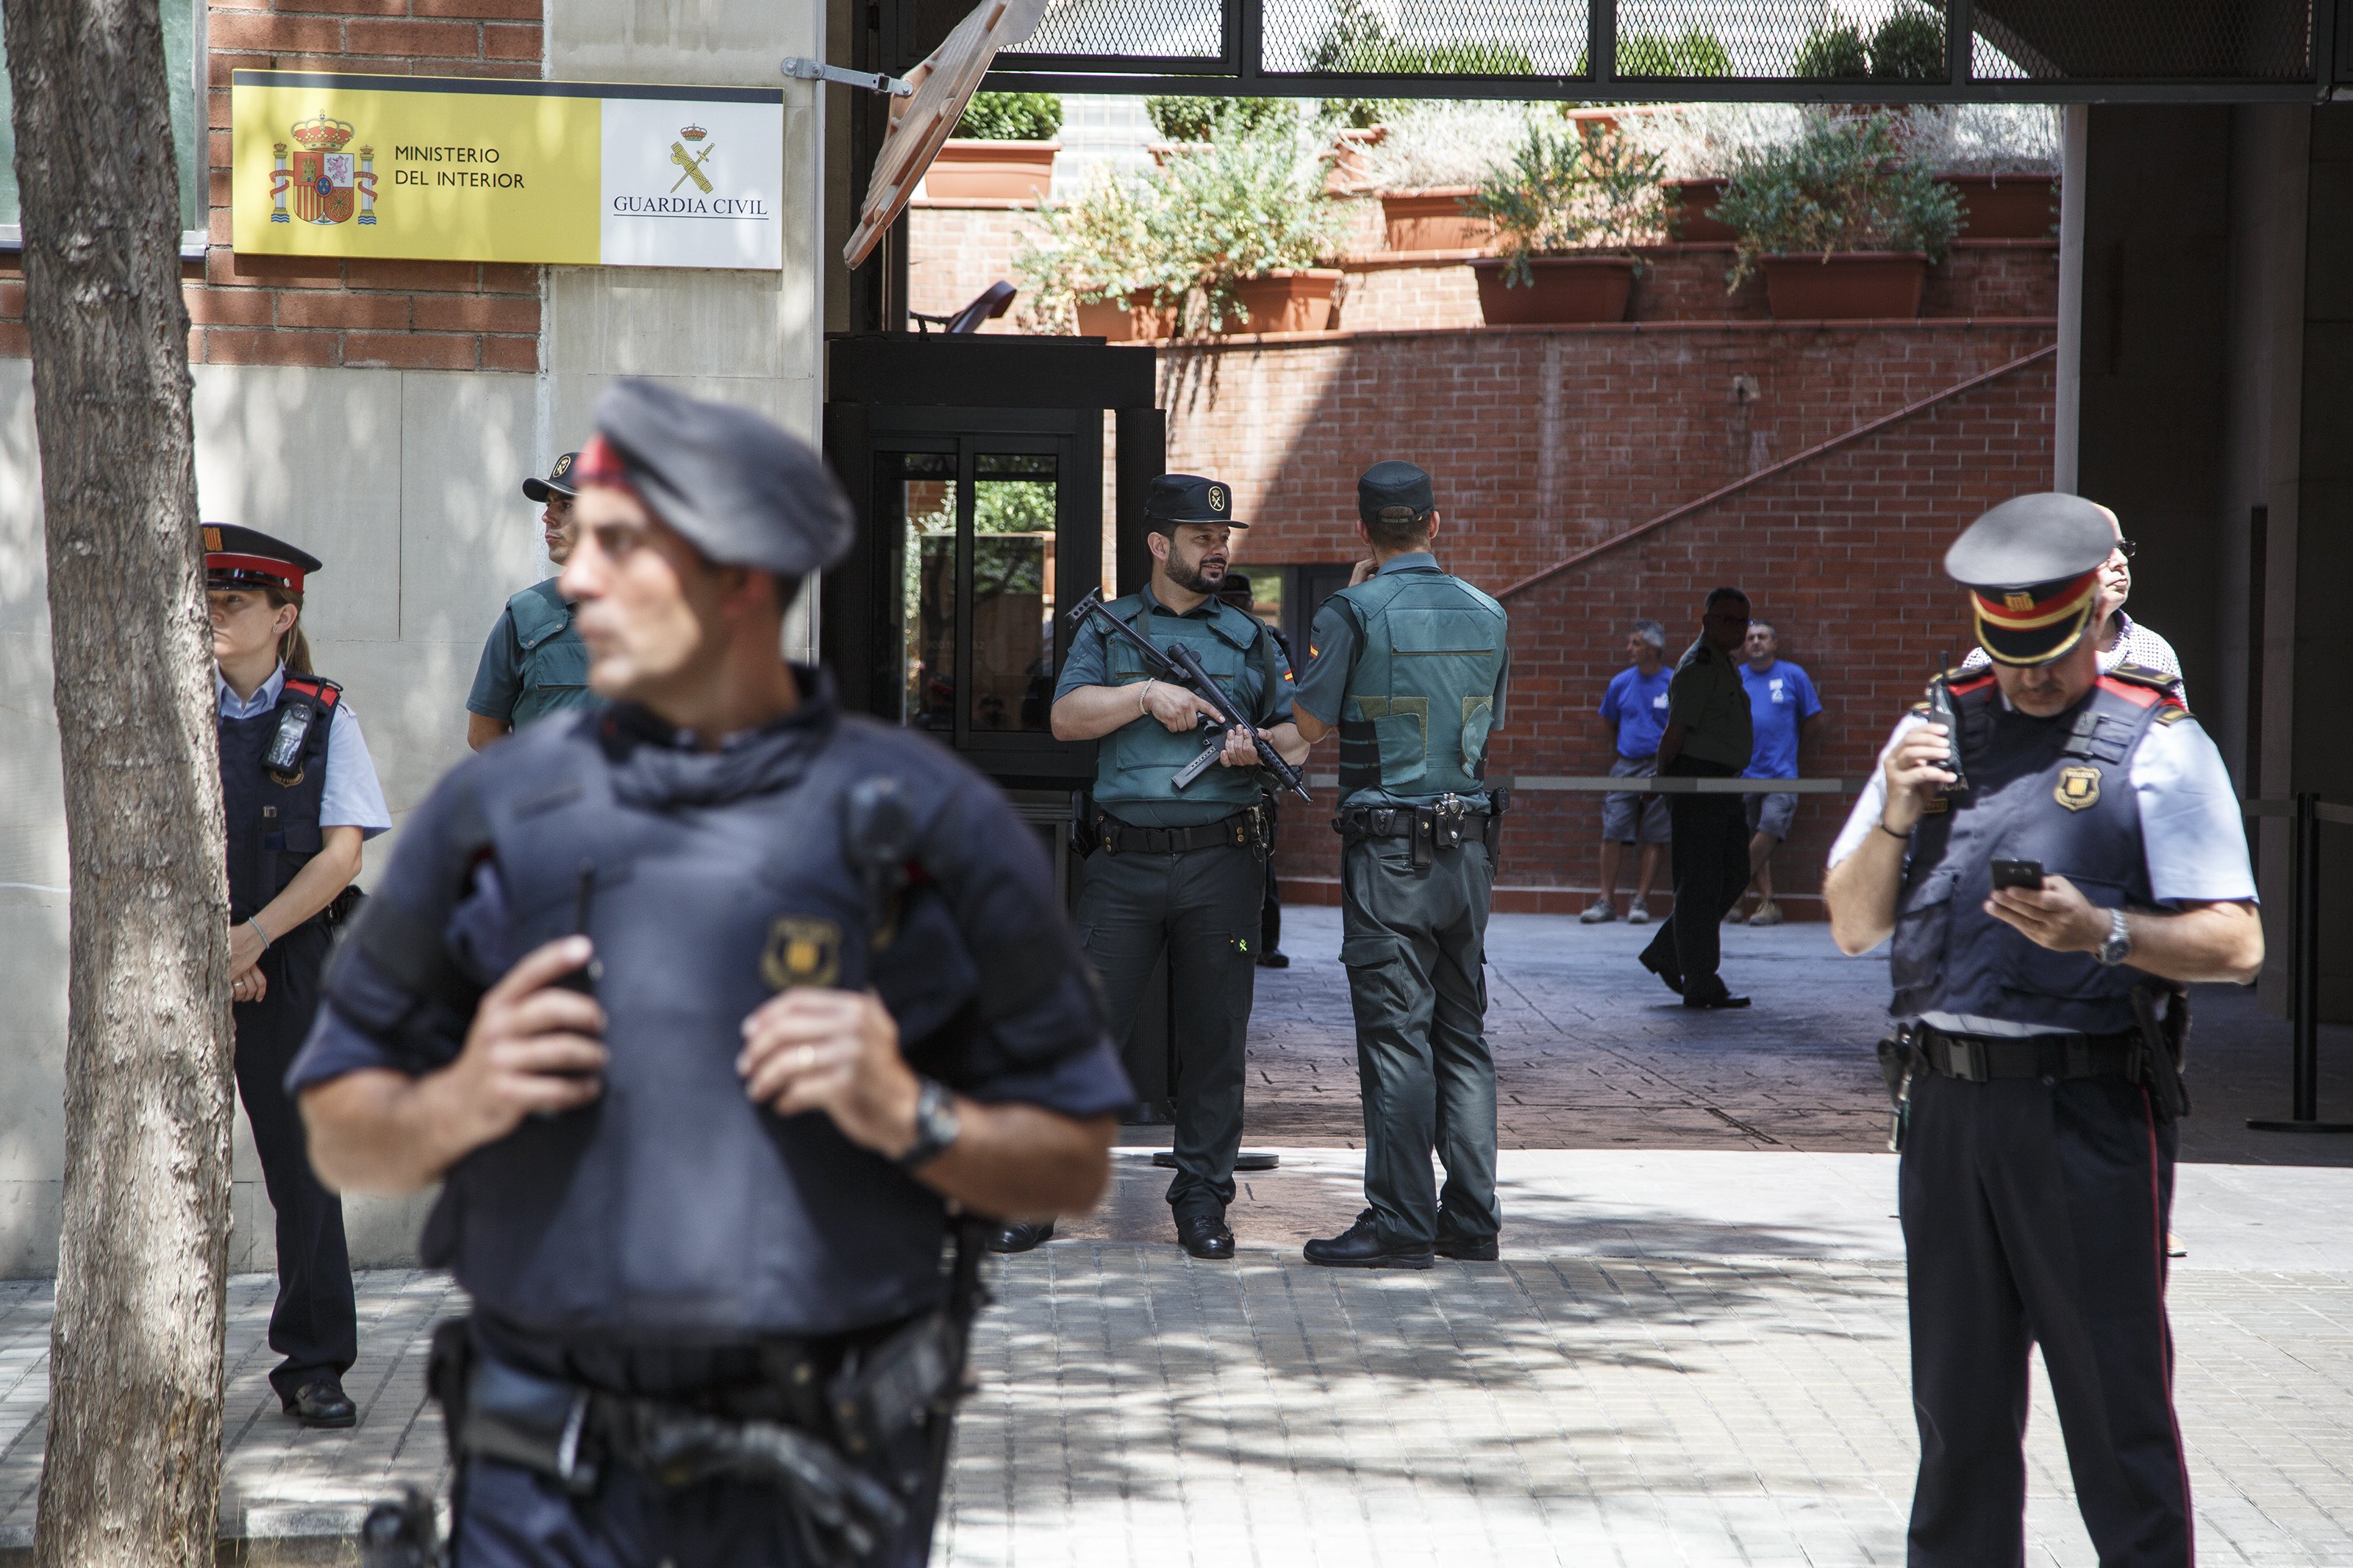 Ex-police officer wants to remove anti-terrorism powers from Catalan police